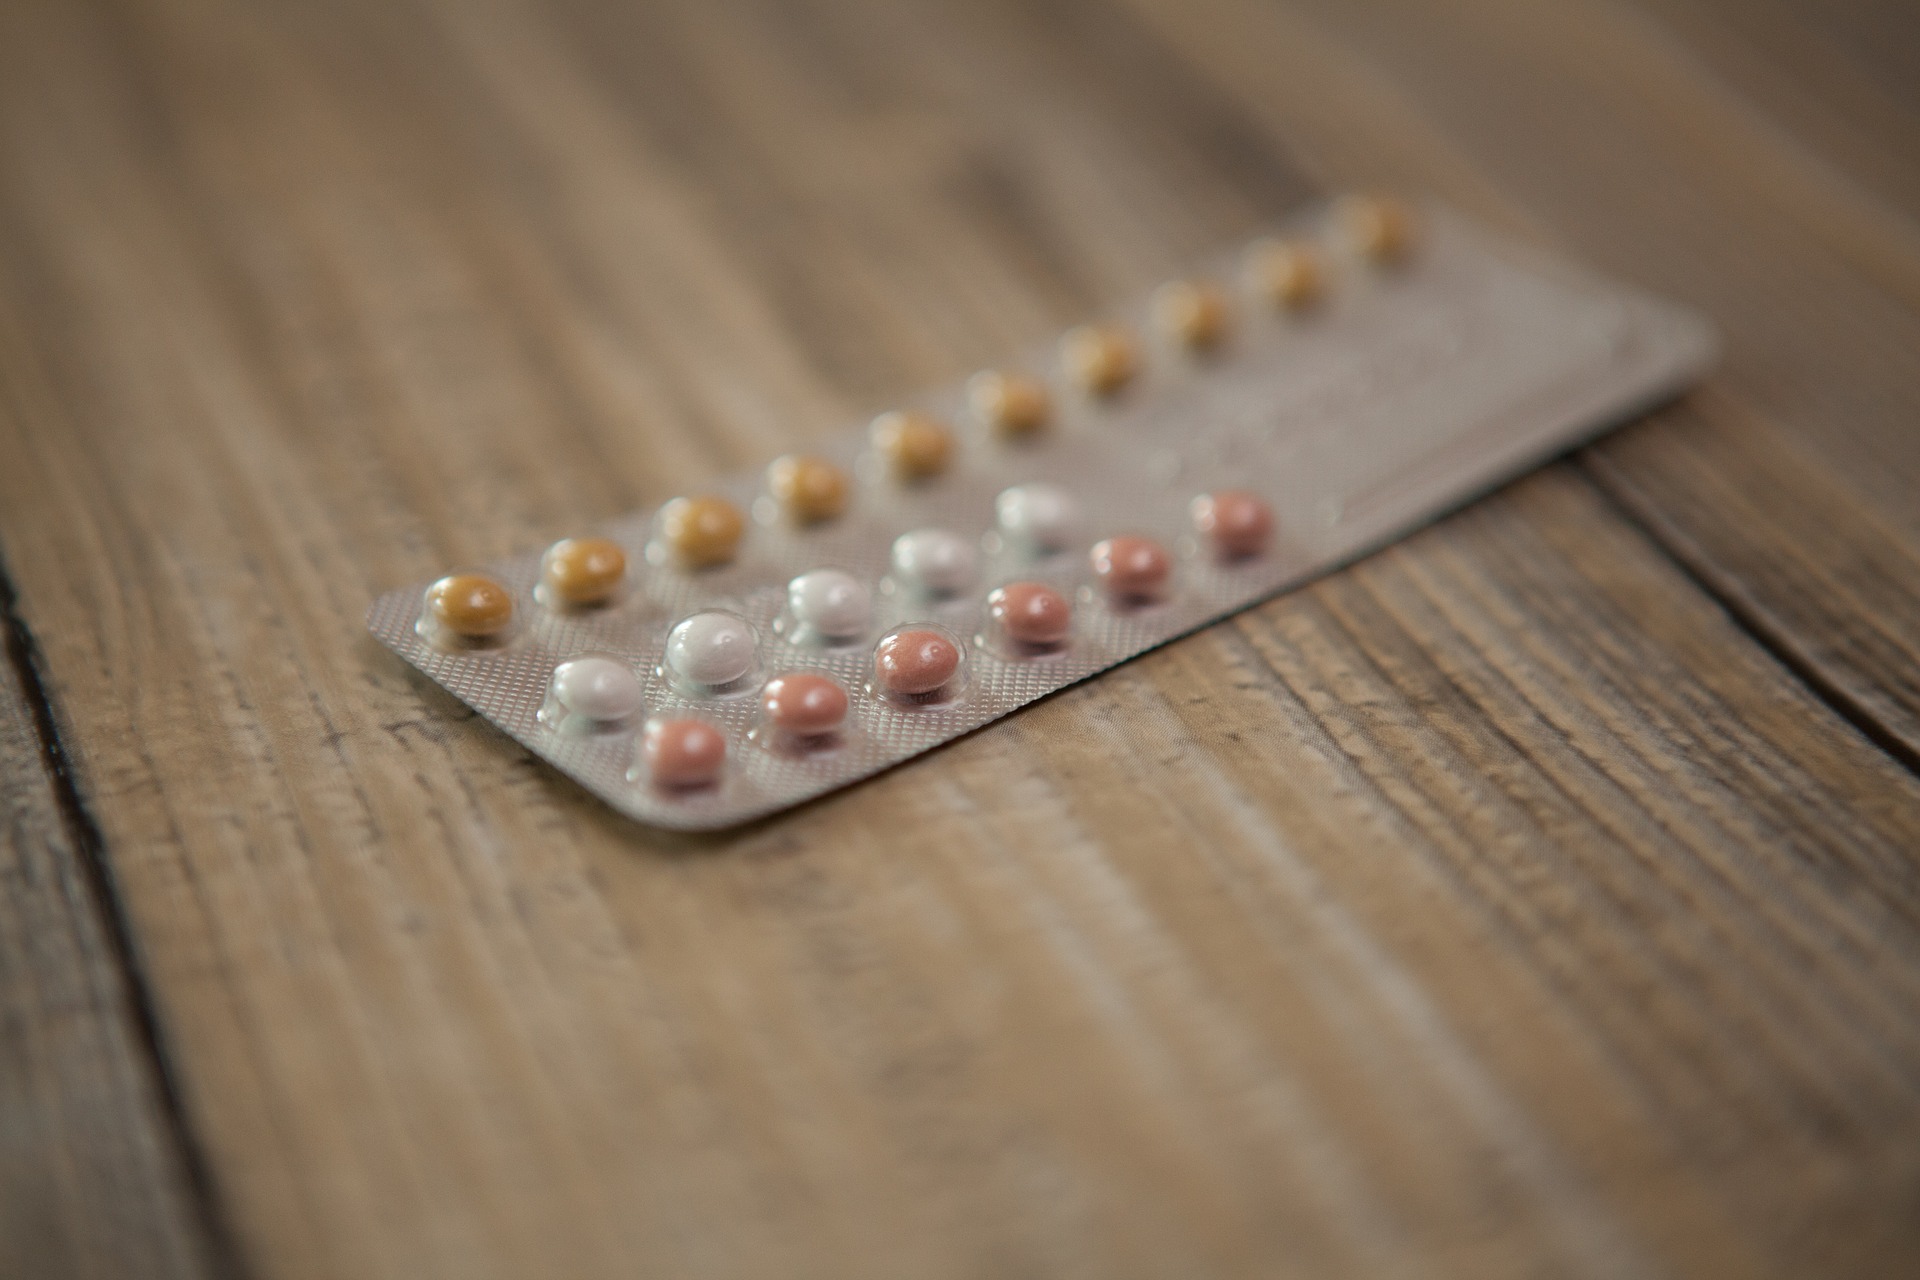 30 million more women accessing contraception than in 2012